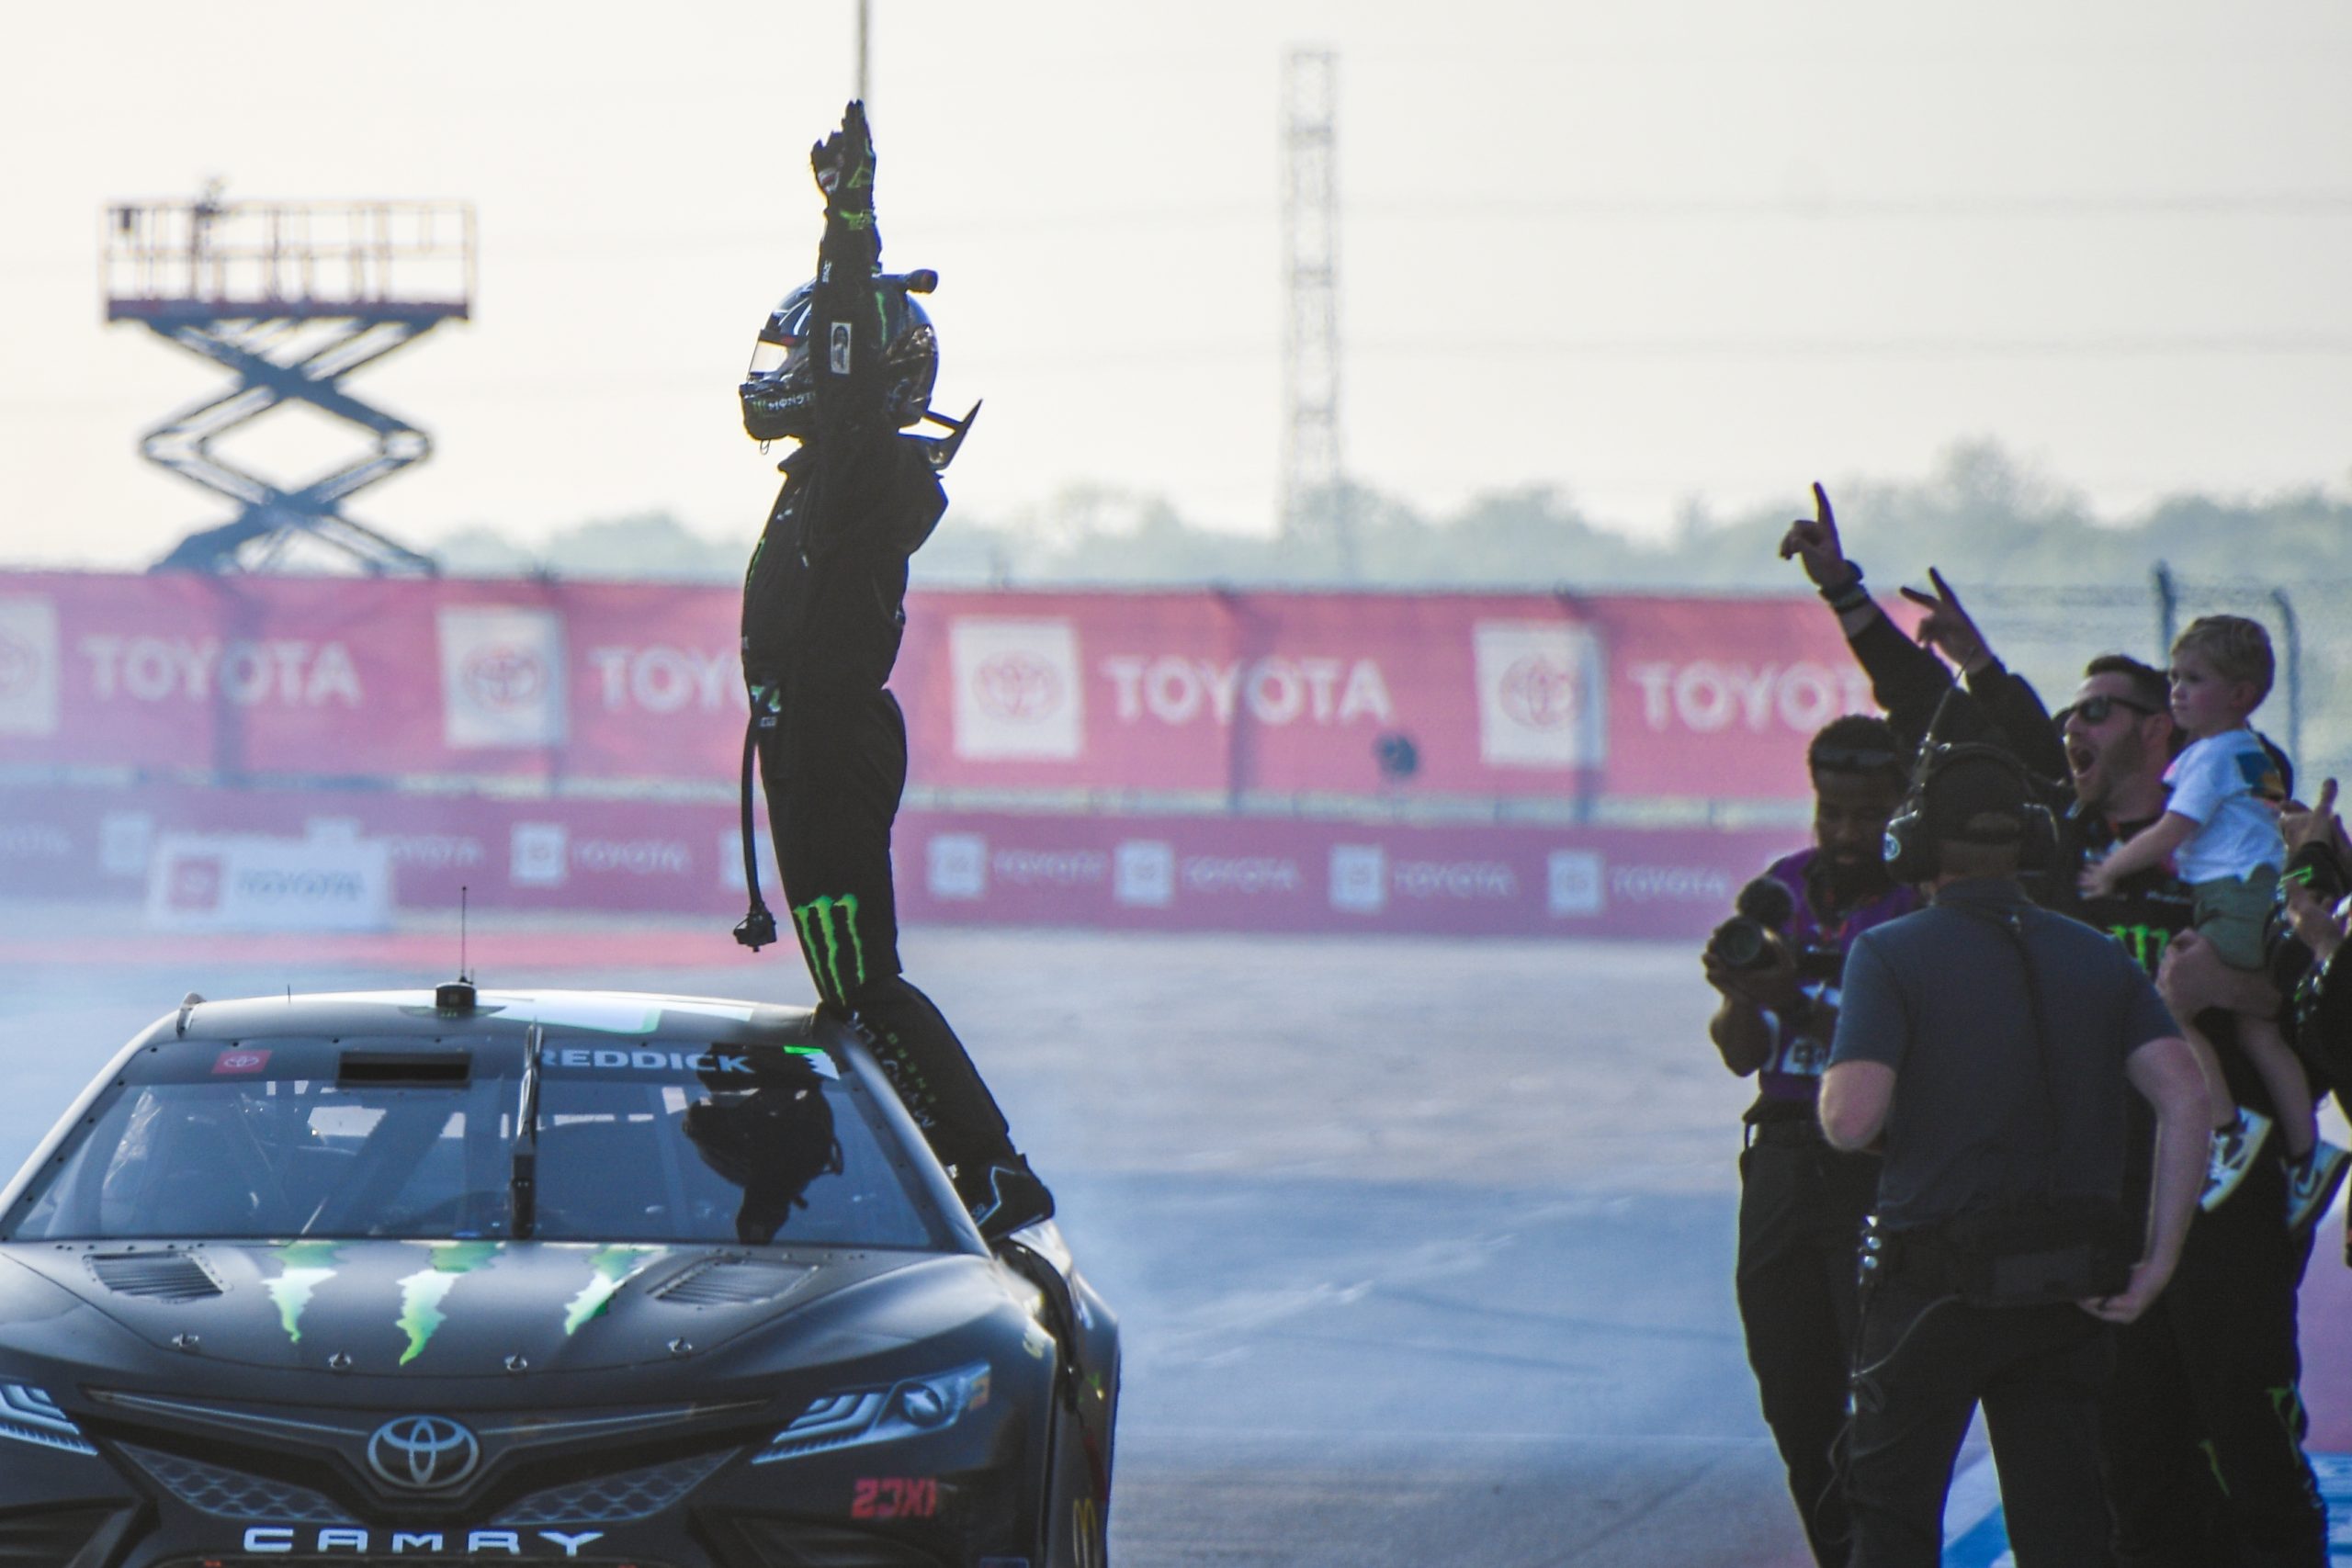 Arms raised in victory. (Photo: Sean Folsom | The Podium Finish)